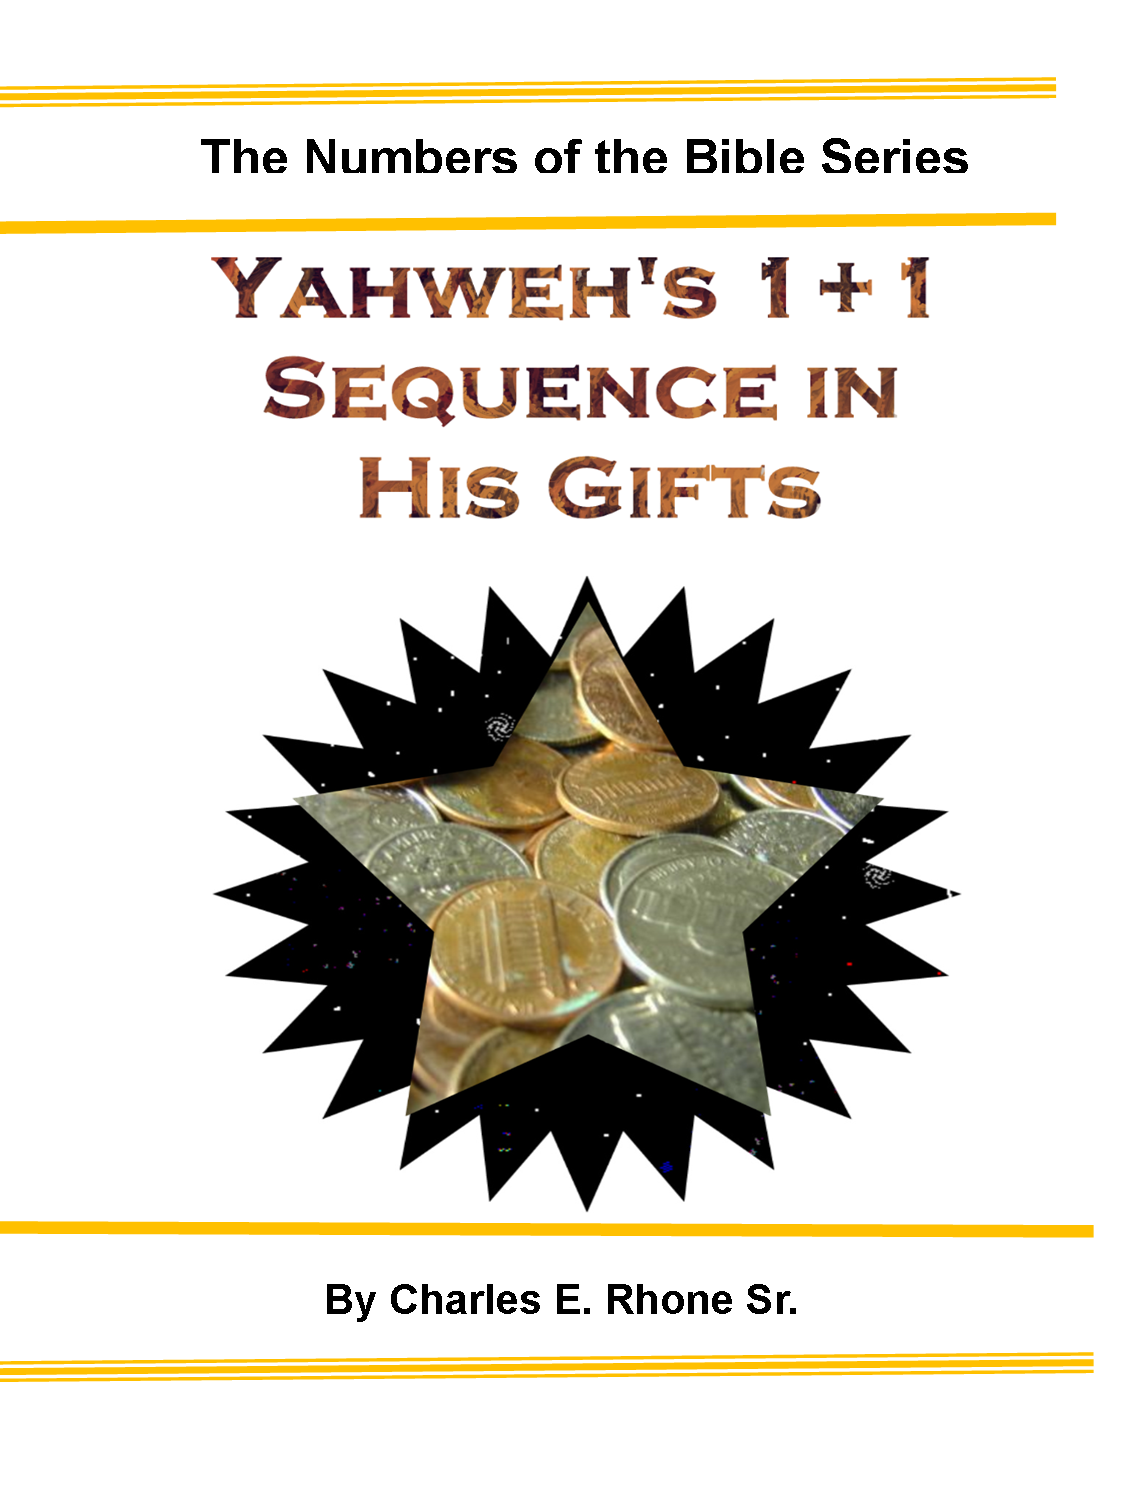 How Yahweh Numbered His Great Gifts in the Bible